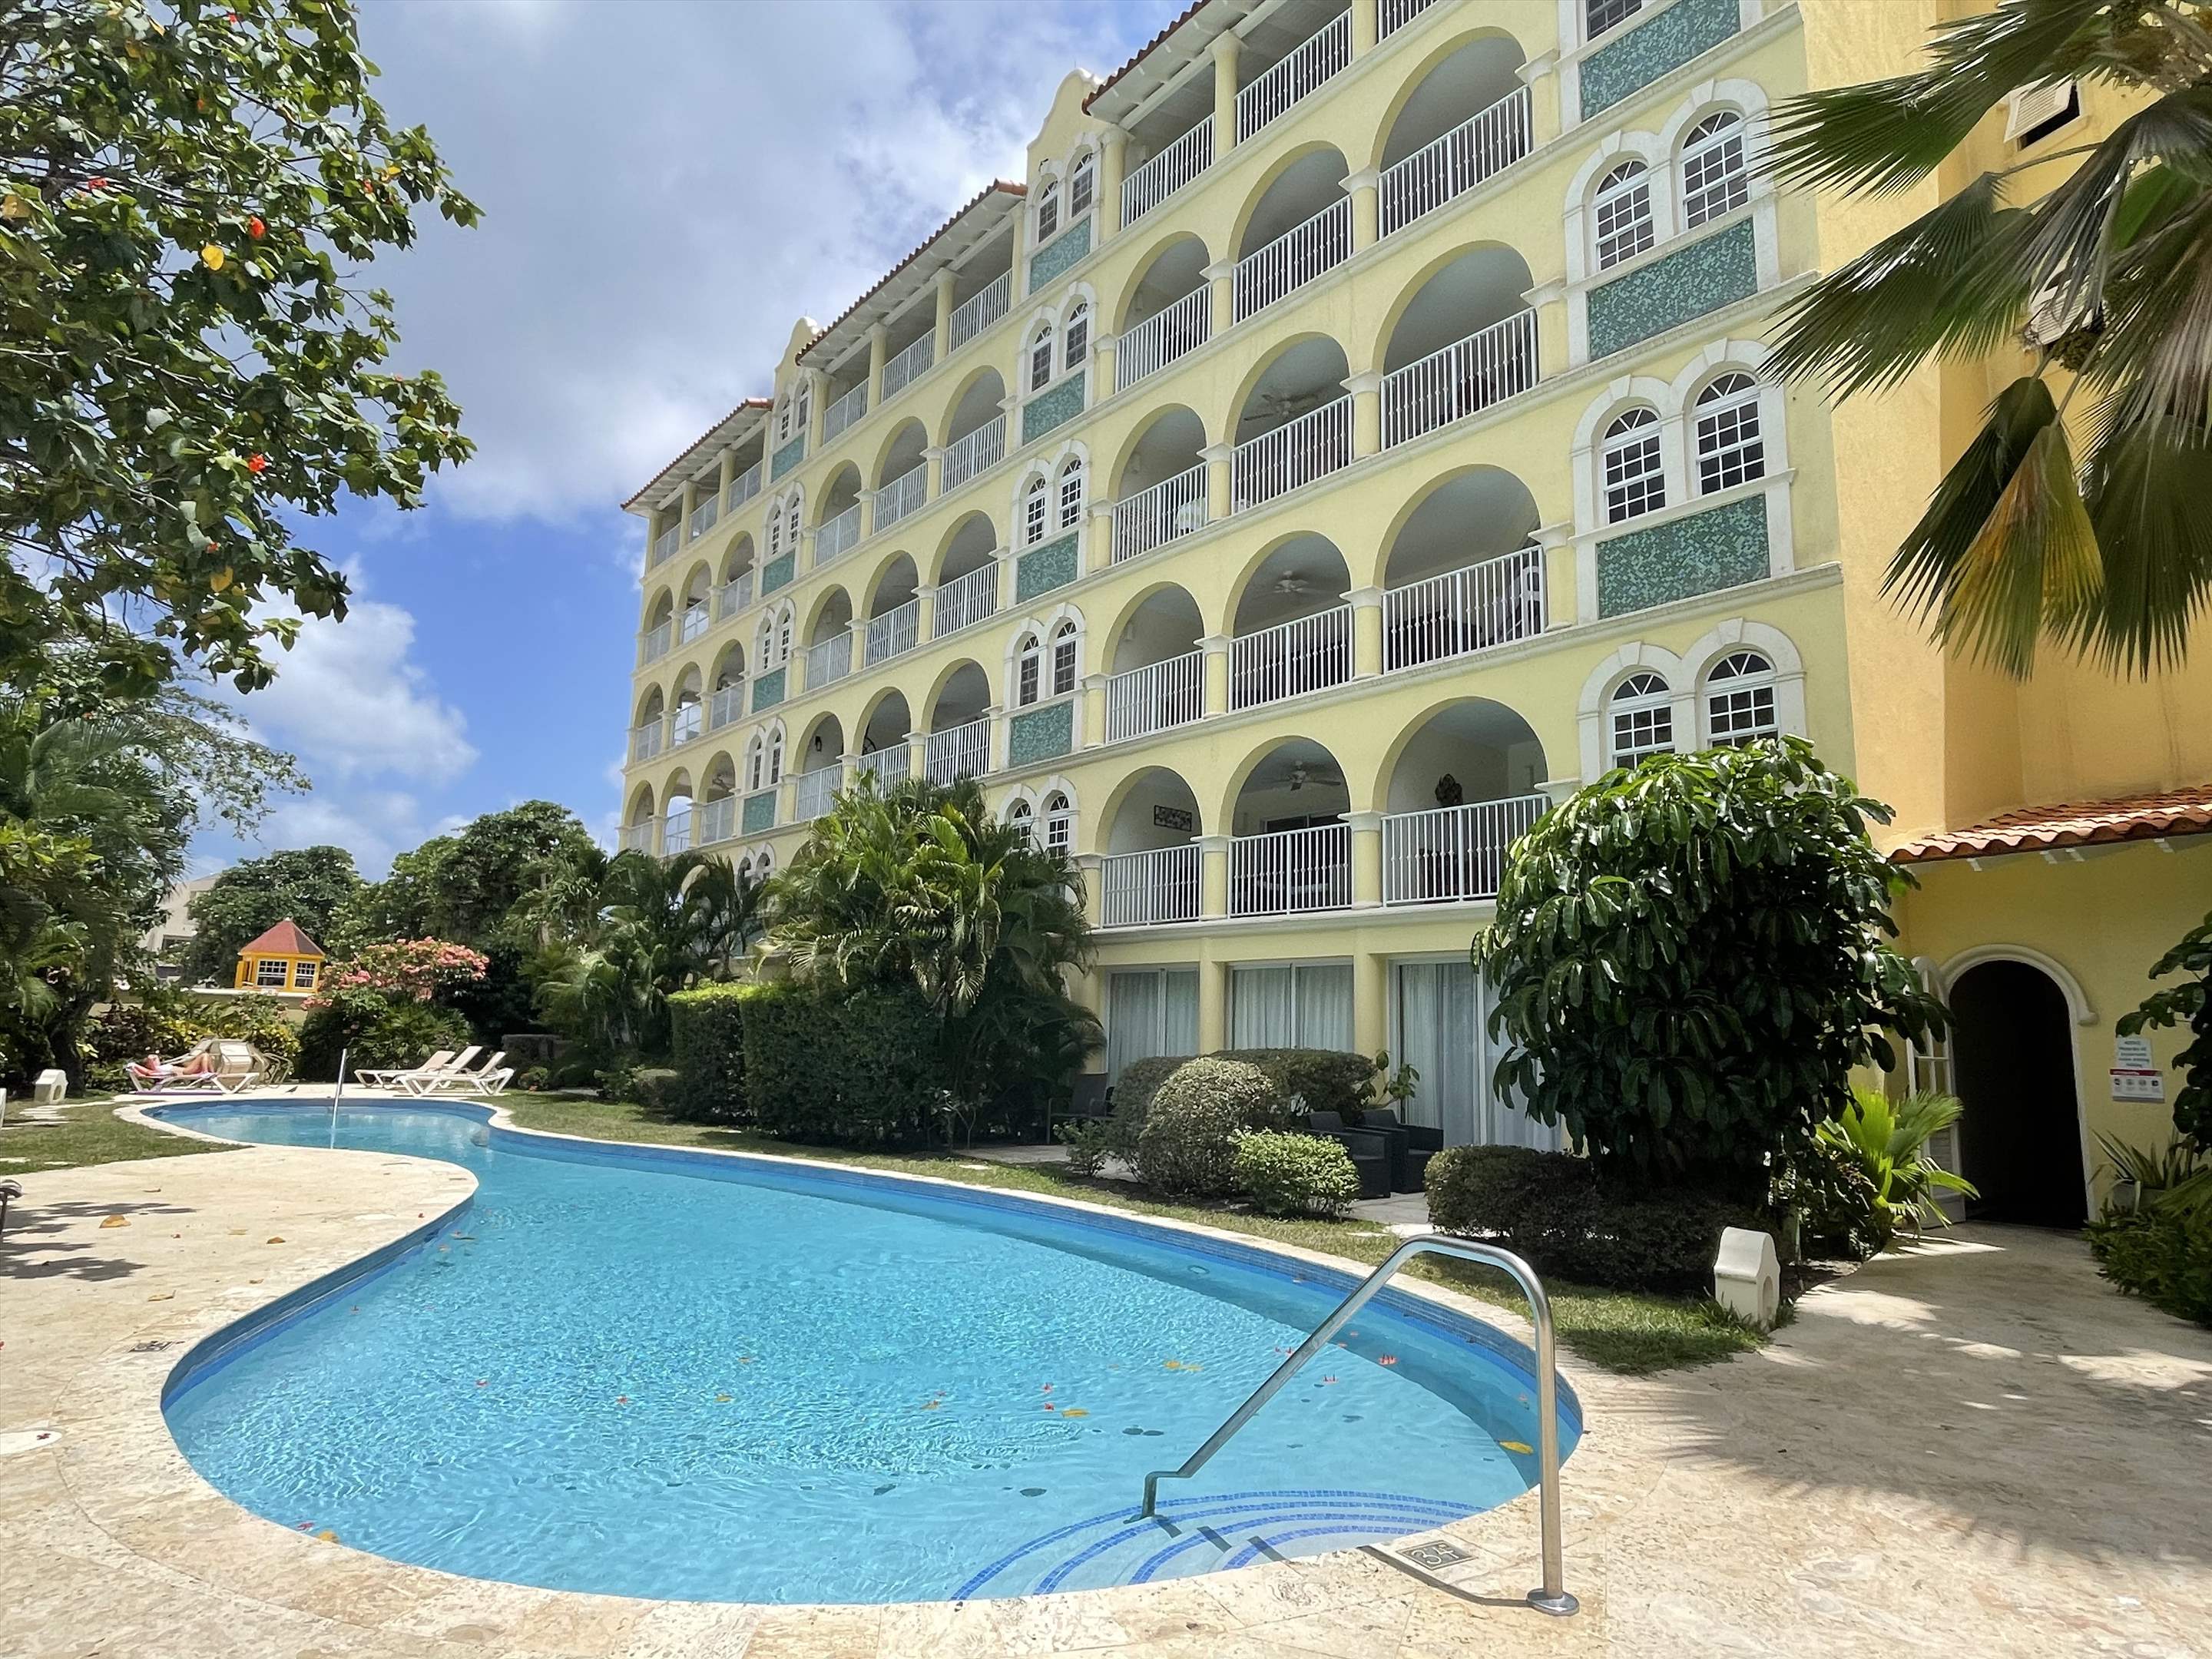 Sapphire Beach 505 , 2 Bedroom , 2 bedroom apartment in St. Lawrence Gap & South Coast, Barbados